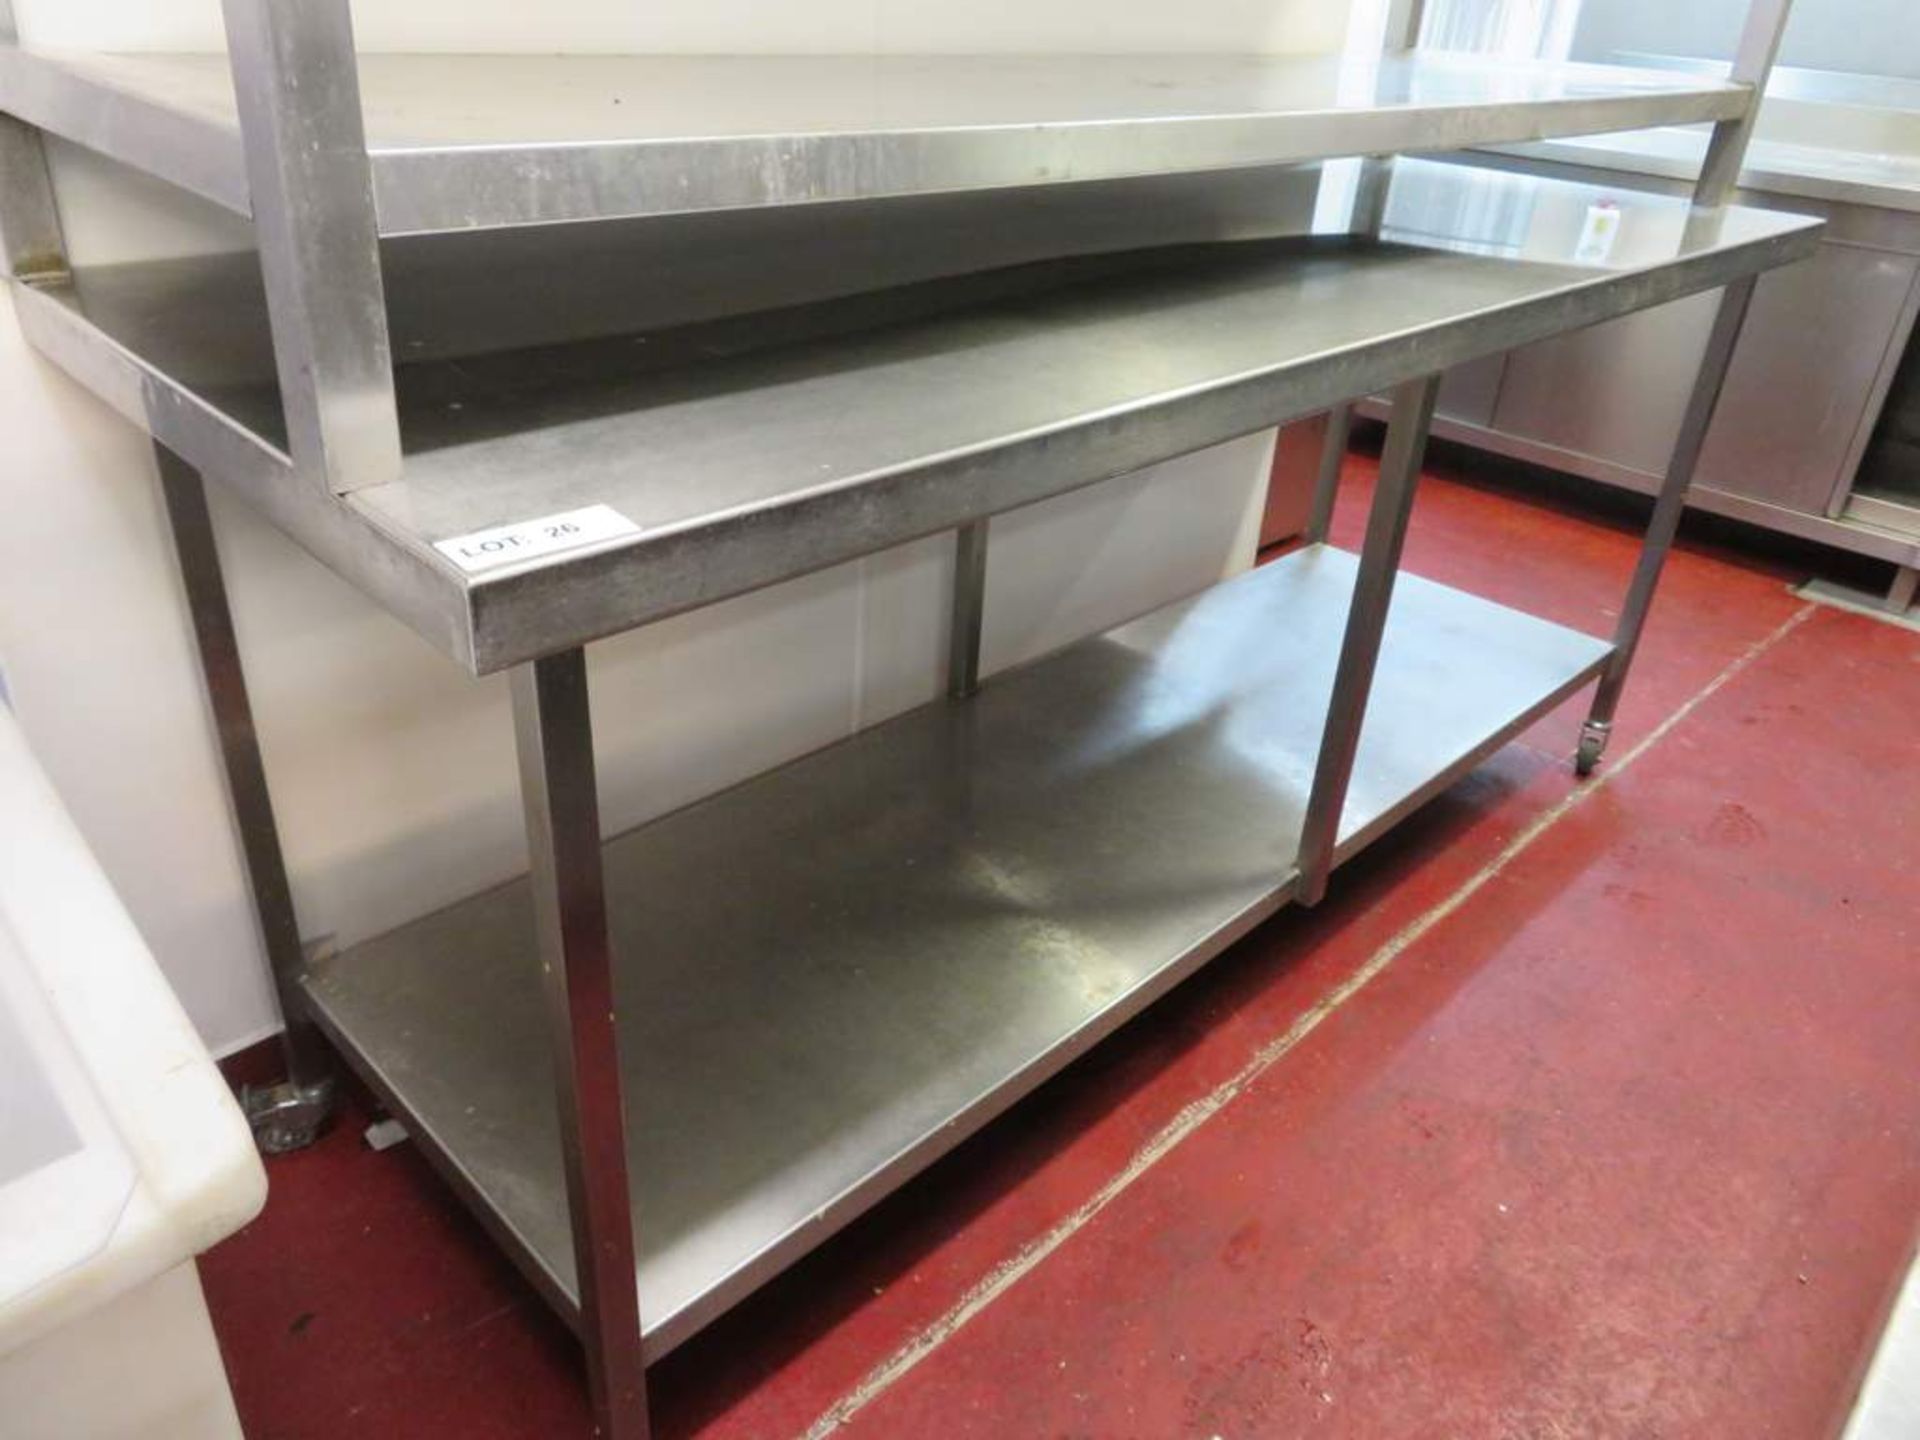 Portable stainless steel preparation unit